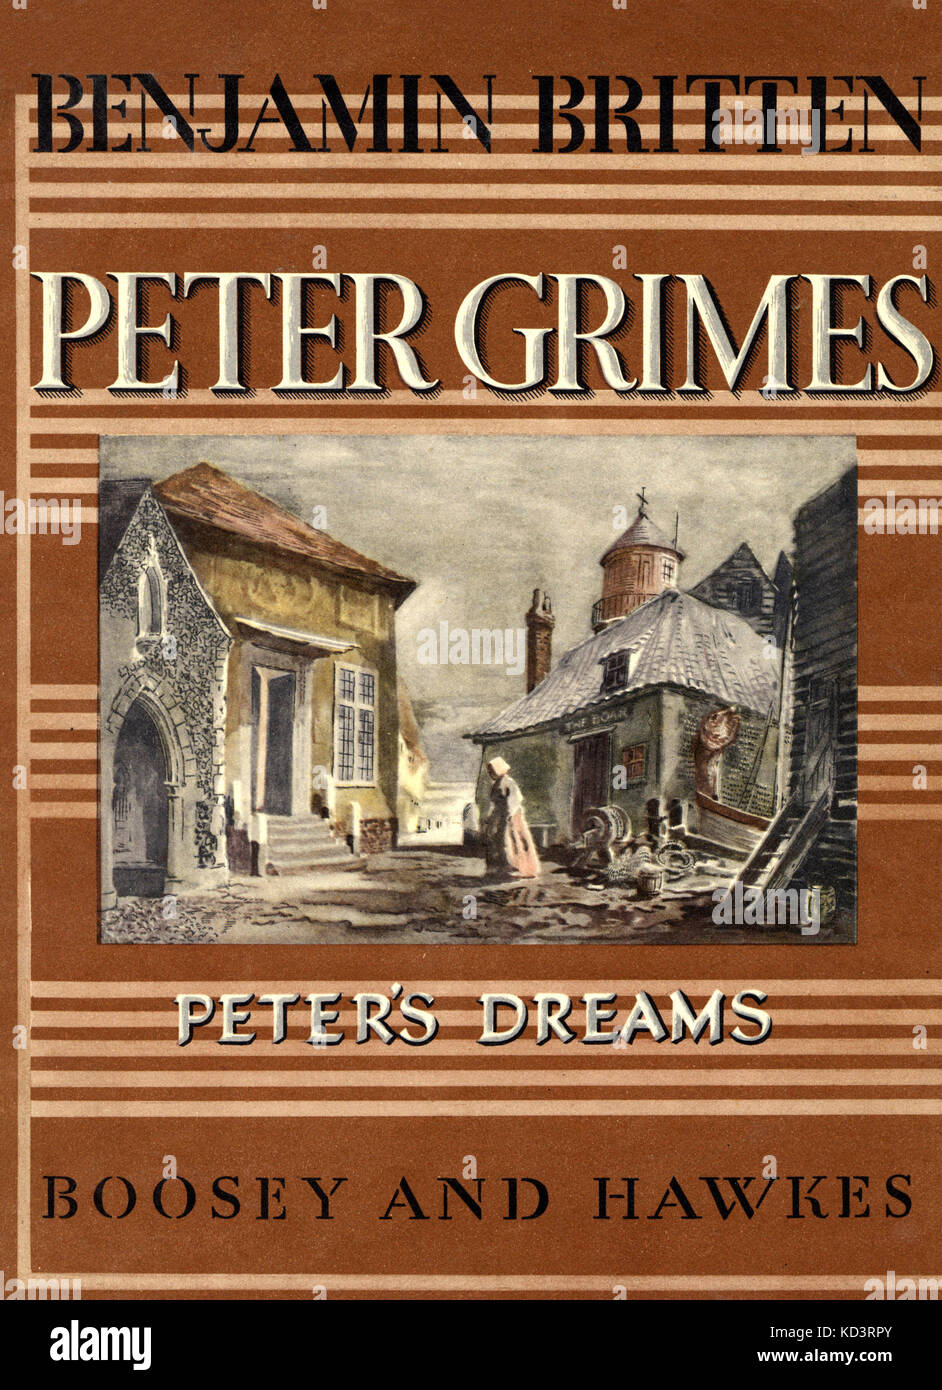 Benjamin BRITTEN - Peter Grimes - Score Cover for 'Peter's Dreams'. Published by Boosey & Hawkes, New York, 1945.  English composer, conductor and pianist (1913-1976). Stock Photo